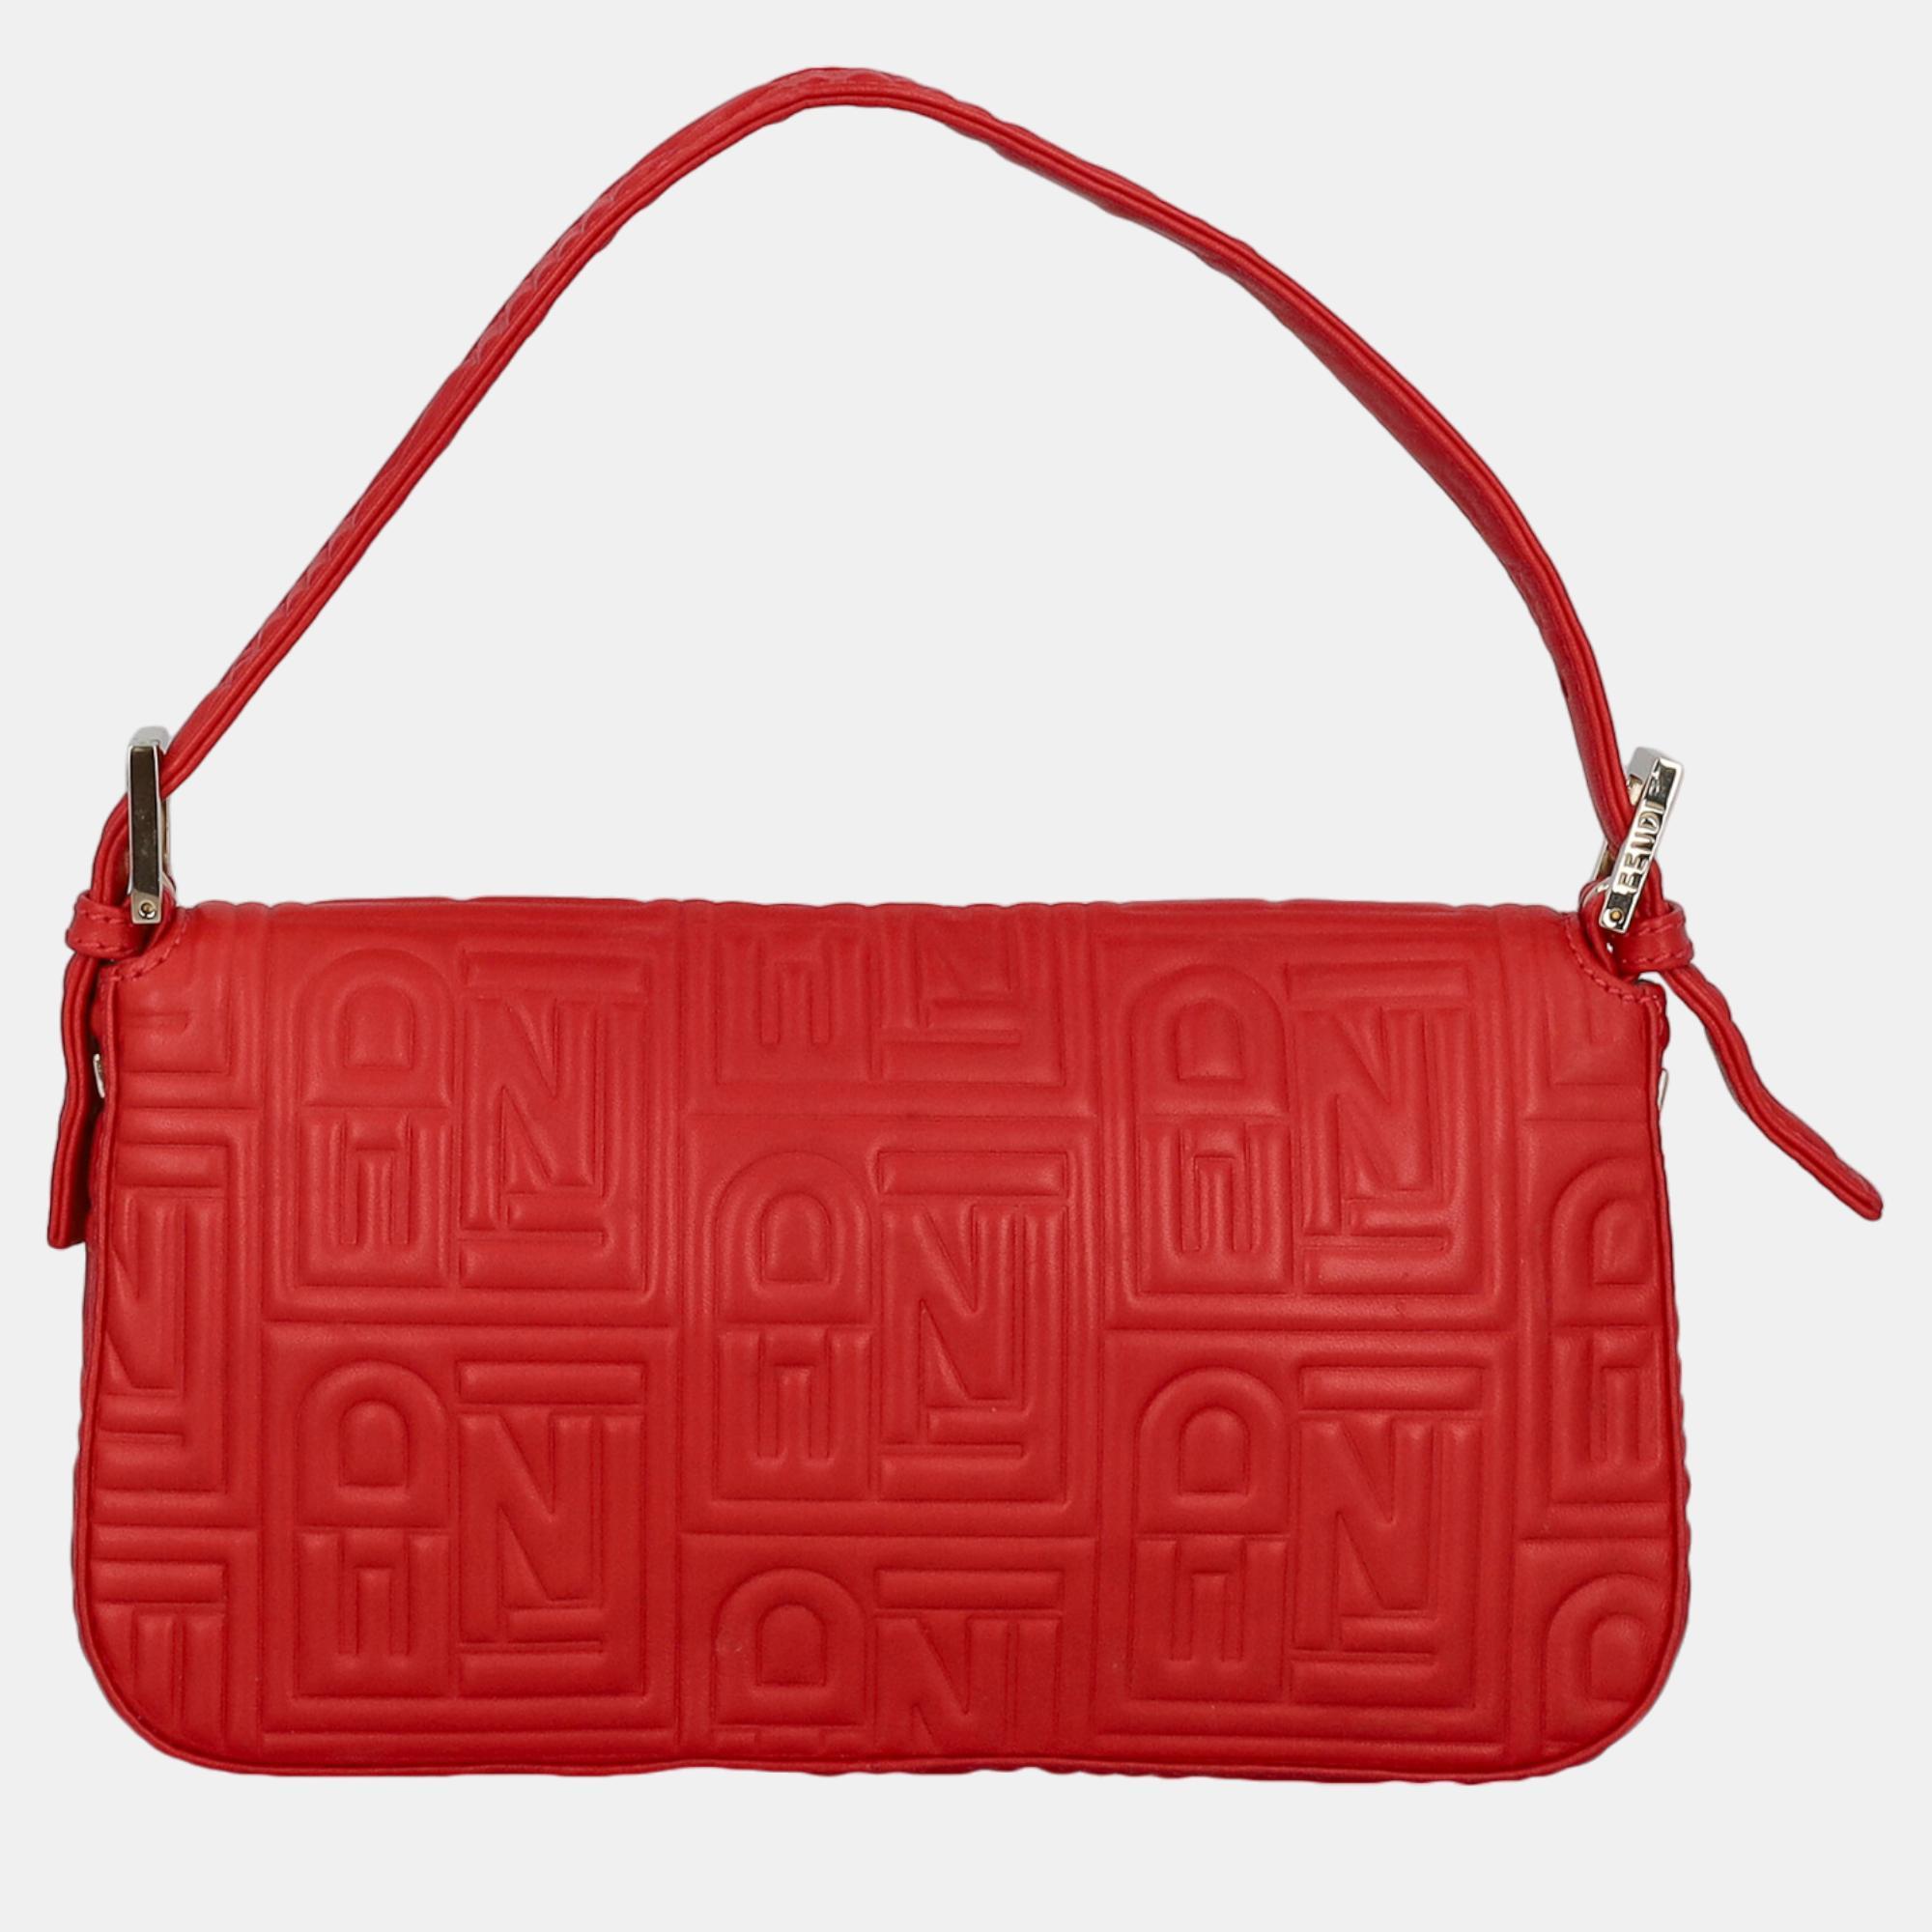 Fendi Baguette -  Women's Leather Hobo Bag - Red - One Size